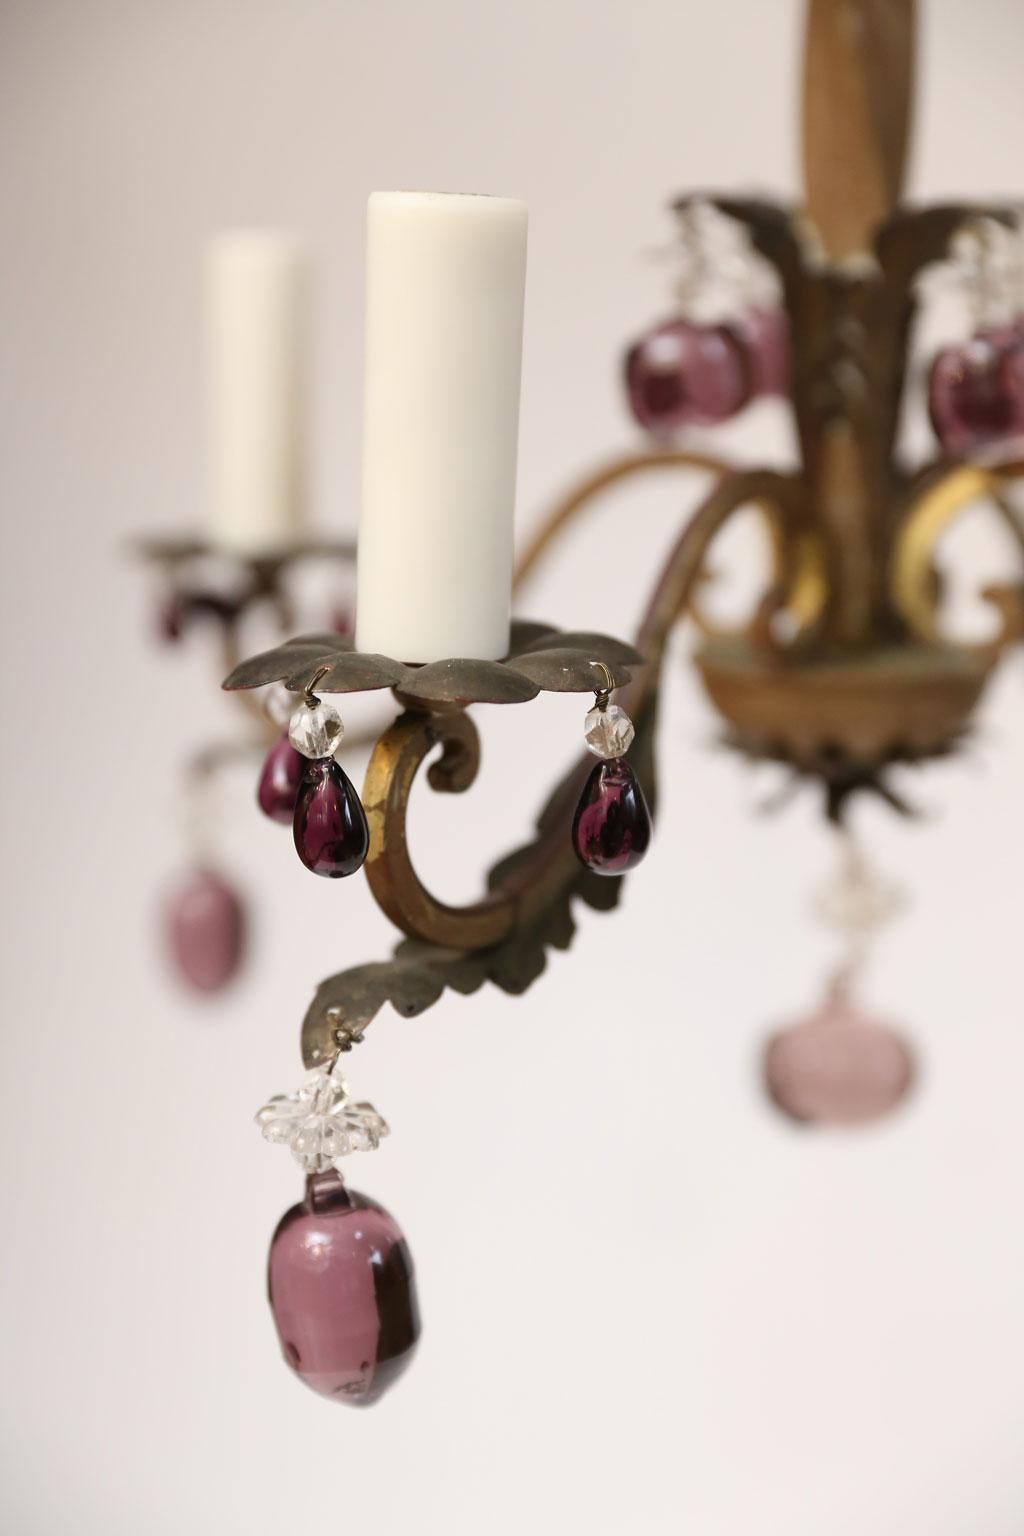 French Romantic Iron and Crystal Chandelier With Amethyst-Colored Drops 3